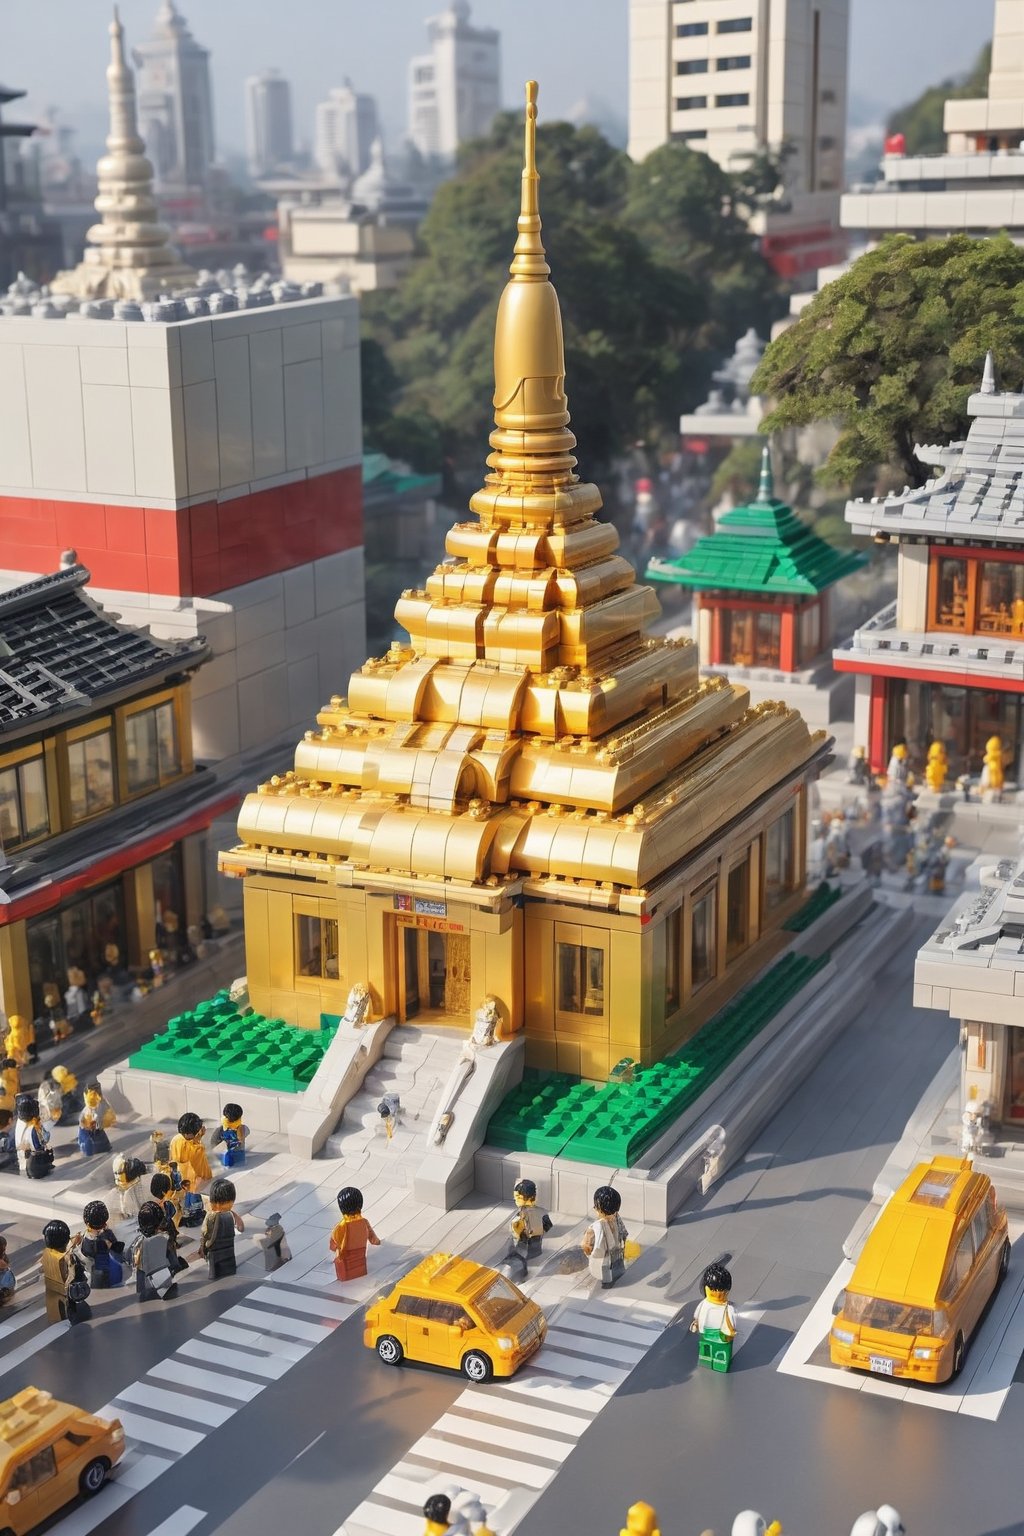 Build a Lego temple world, with many parallel gold chrome Buddha statues on the roadside, crowded real crowds, kaisatsu, STOKYO, station, a lot boys & girls,